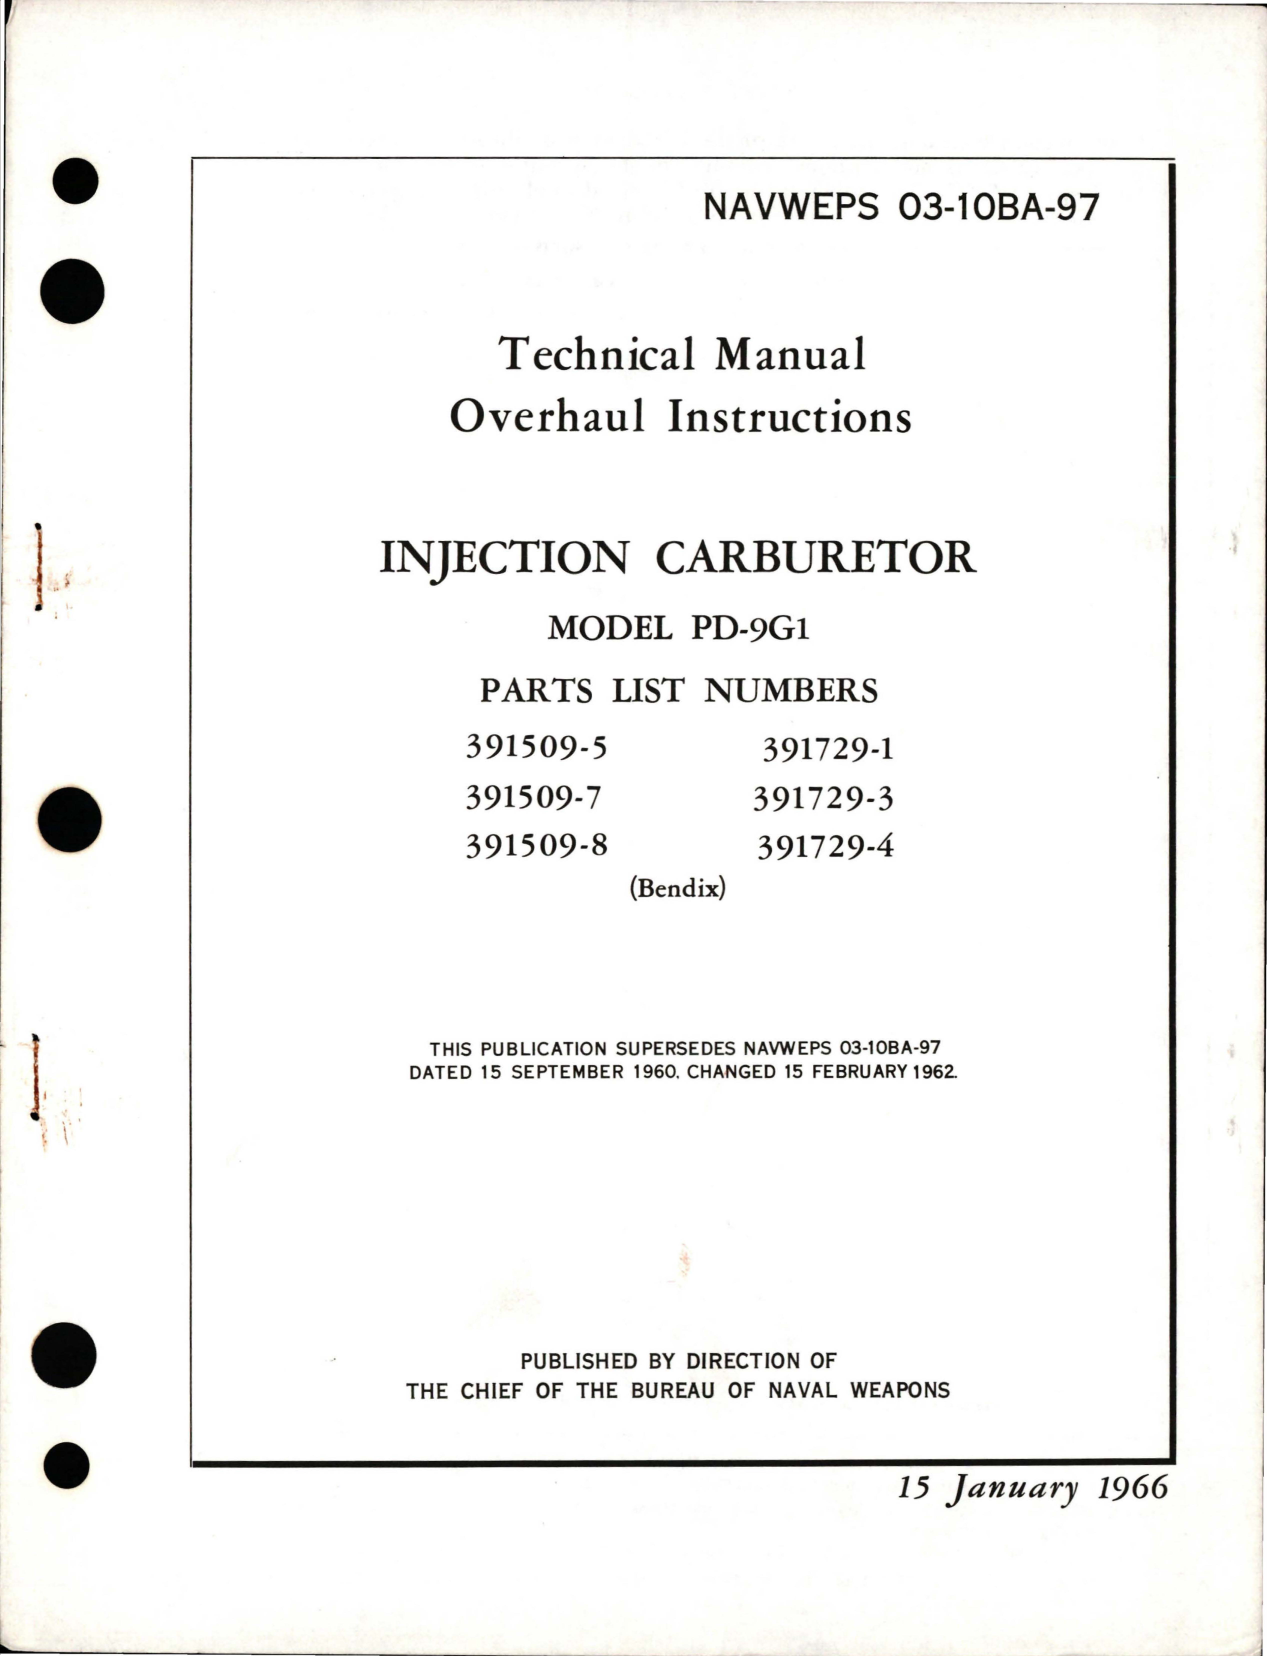 Sample page 1 from AirCorps Library document: Overhaul Instructions for Injection Carburetor - Model PD-9G1